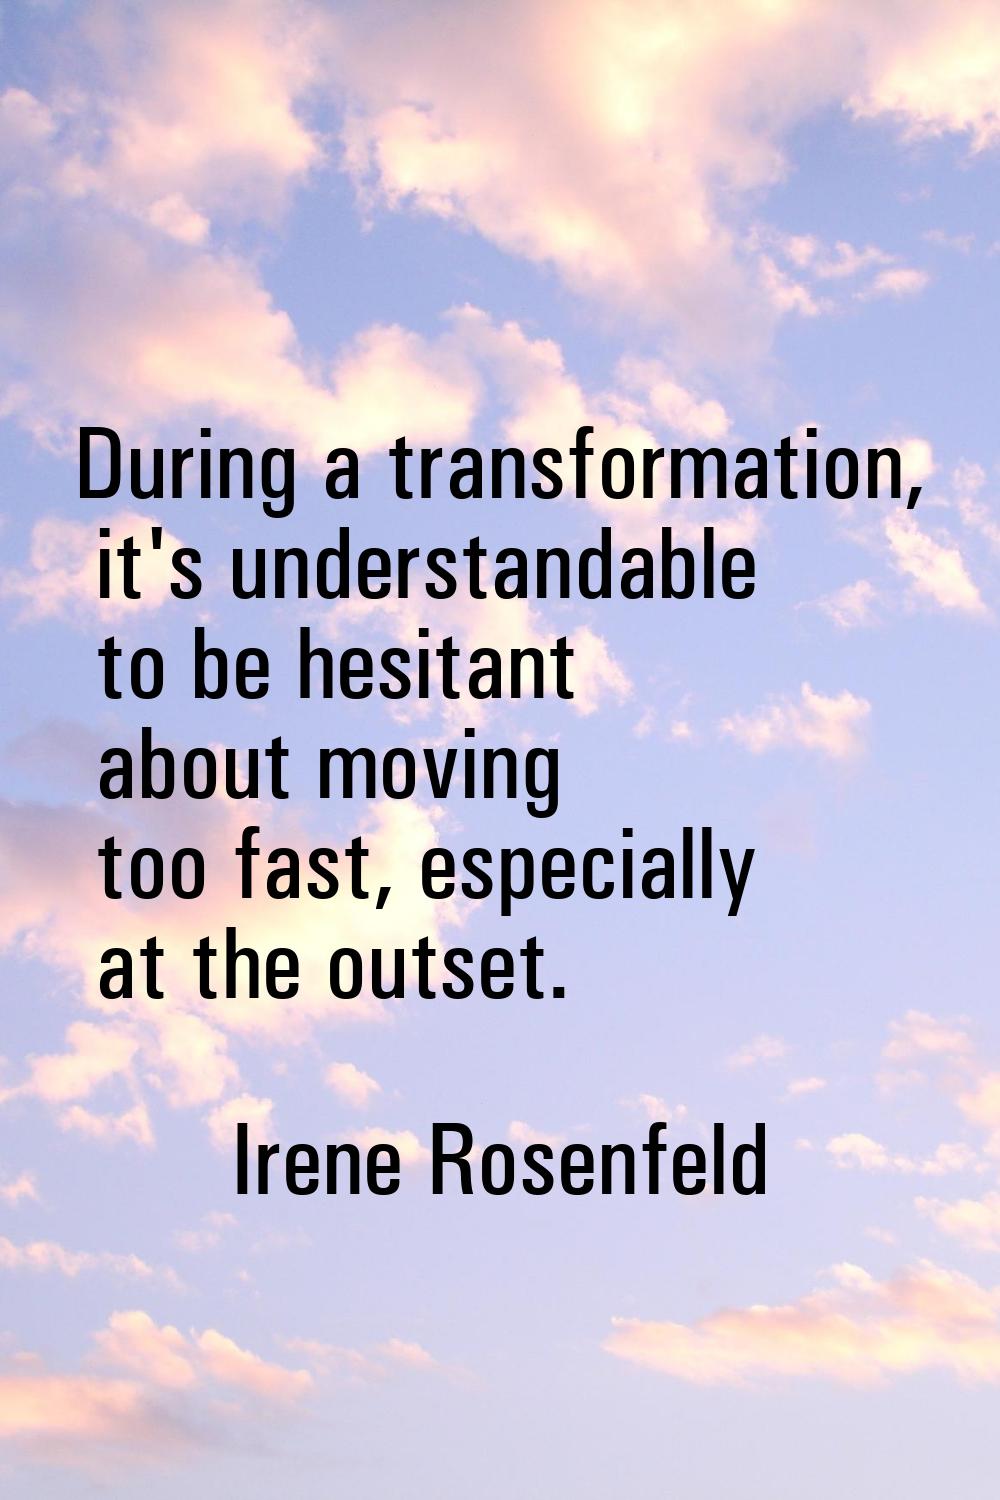 During a transformation, it's understandable to be hesitant about moving too fast, especially at th